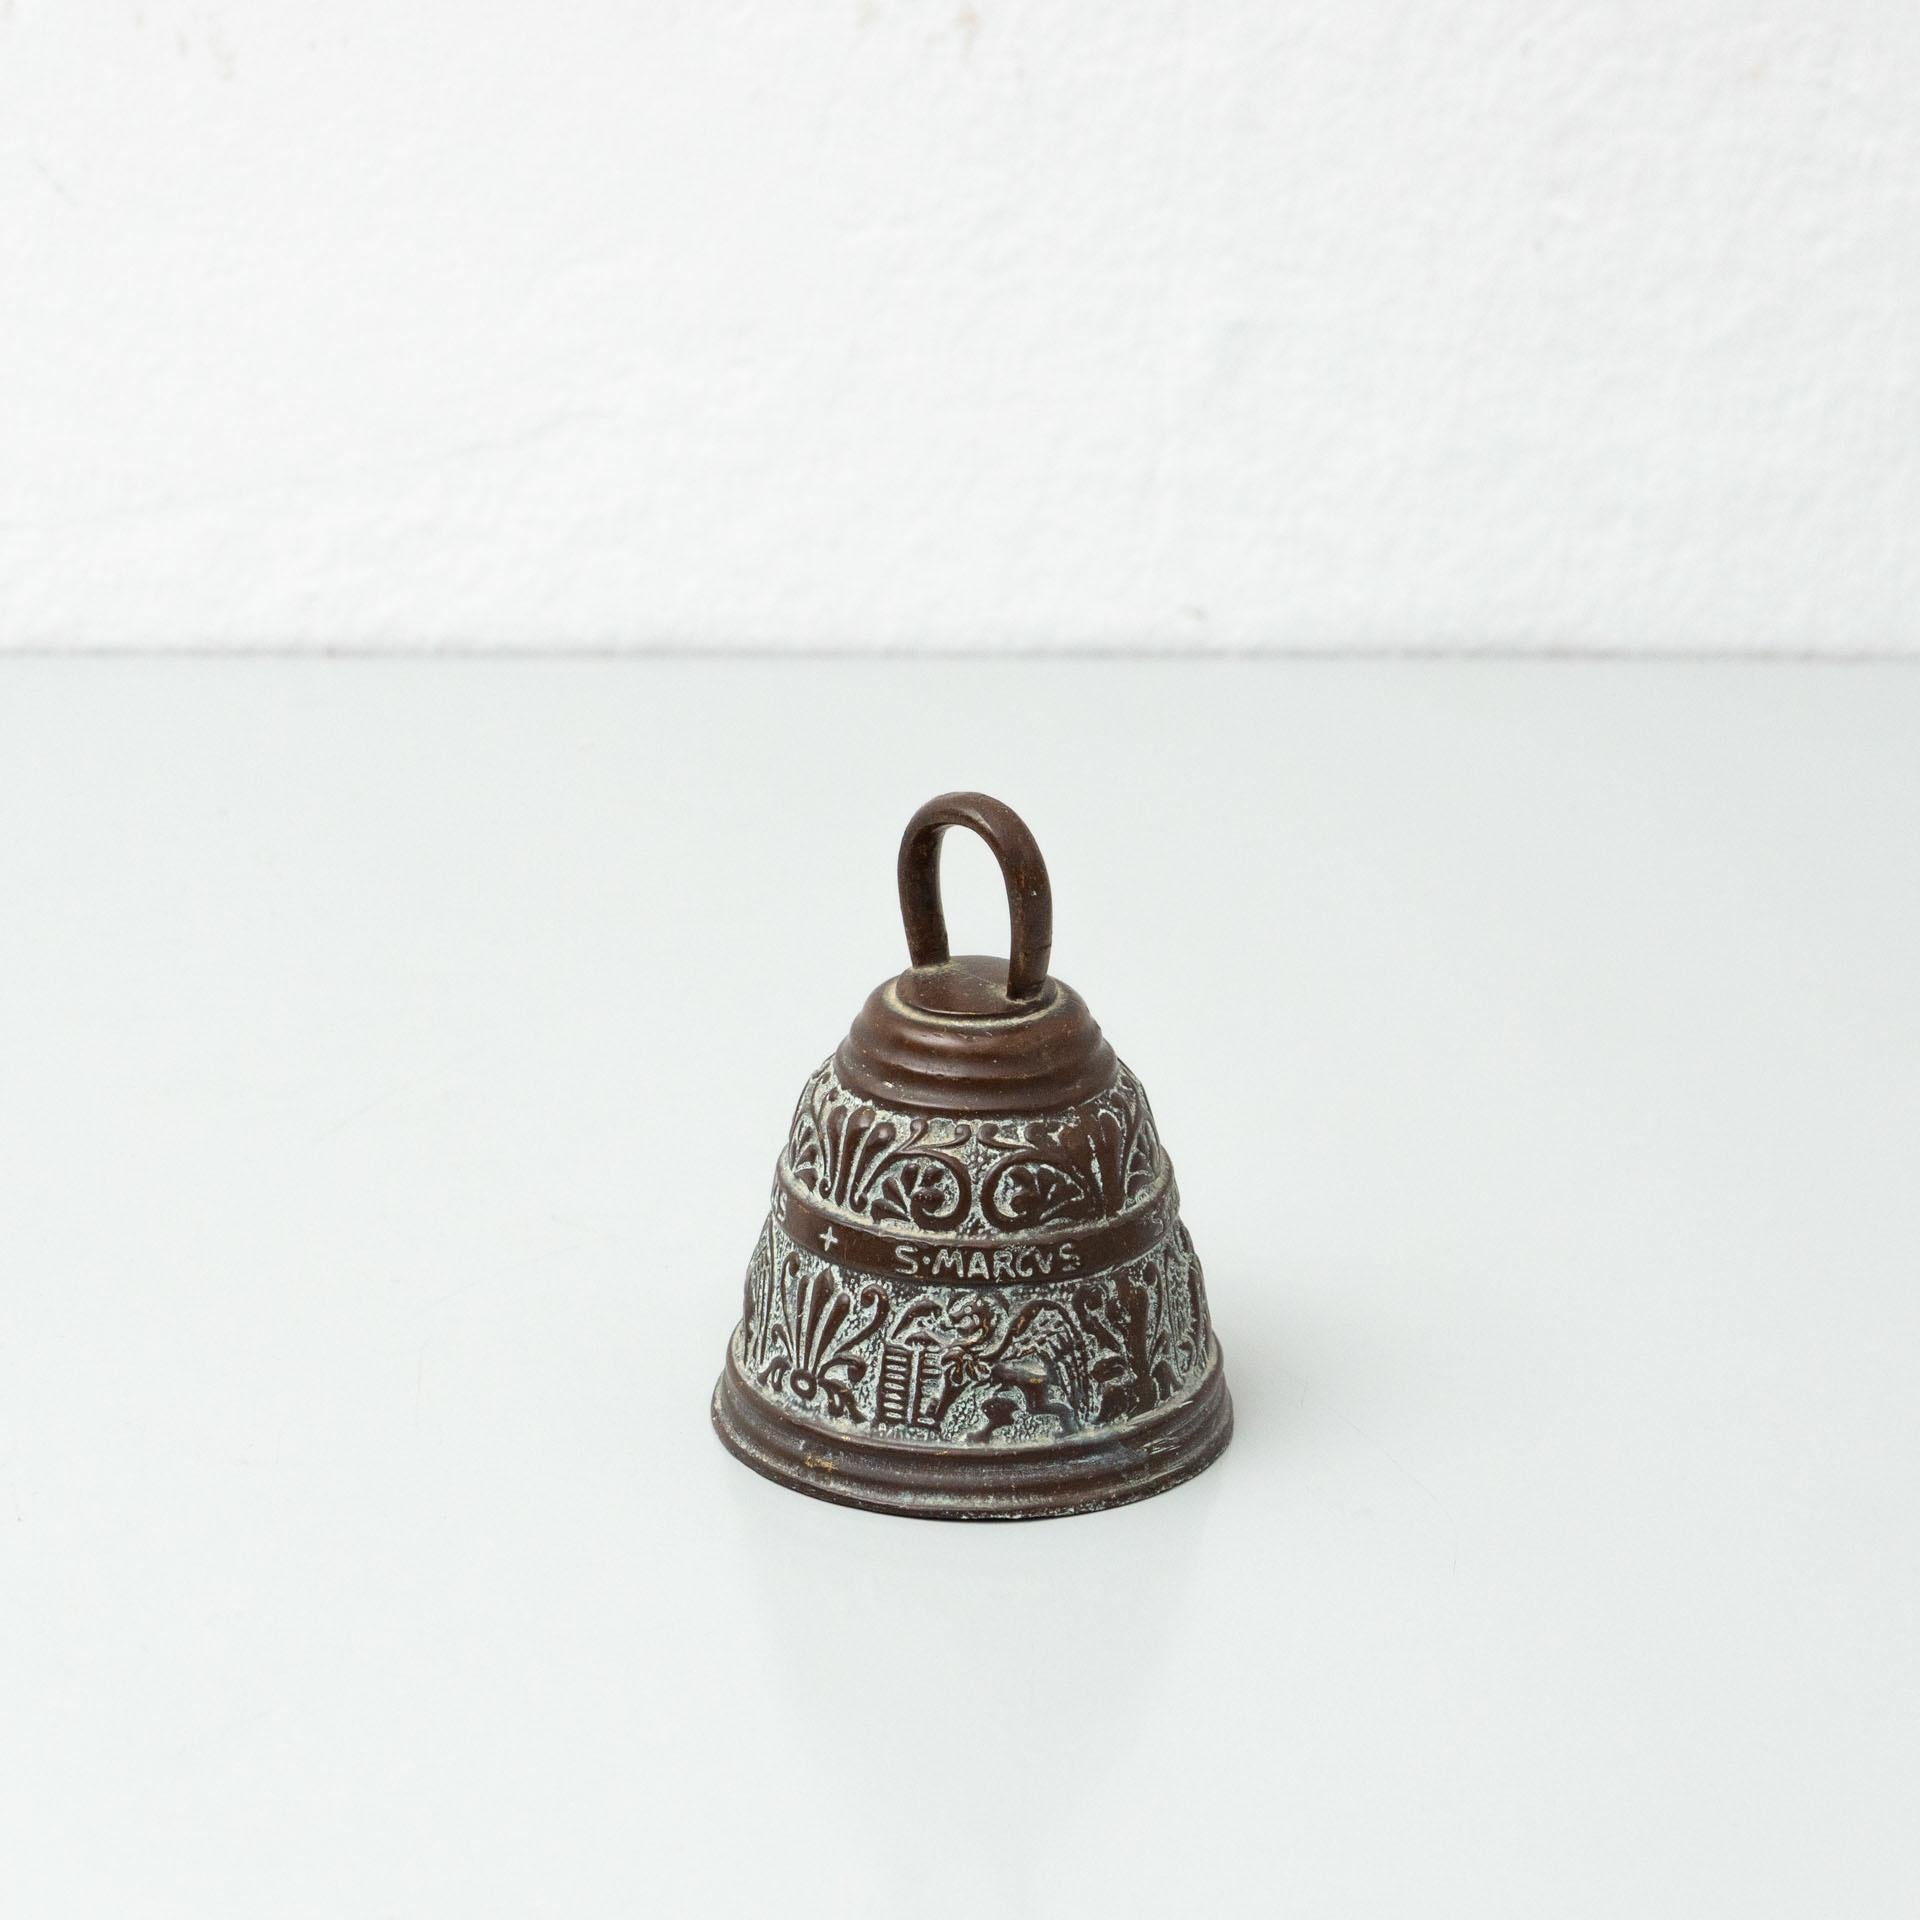 Traditional rustic bronze bell, by unknown manufacturer from Spain, circa 1880.
In original condition, with minor wear consistent with age and use, preserving a beautiful patina.

Materials:
Bronze

Dimensions:
Ø 9.6 cm x H 12.5 cm.